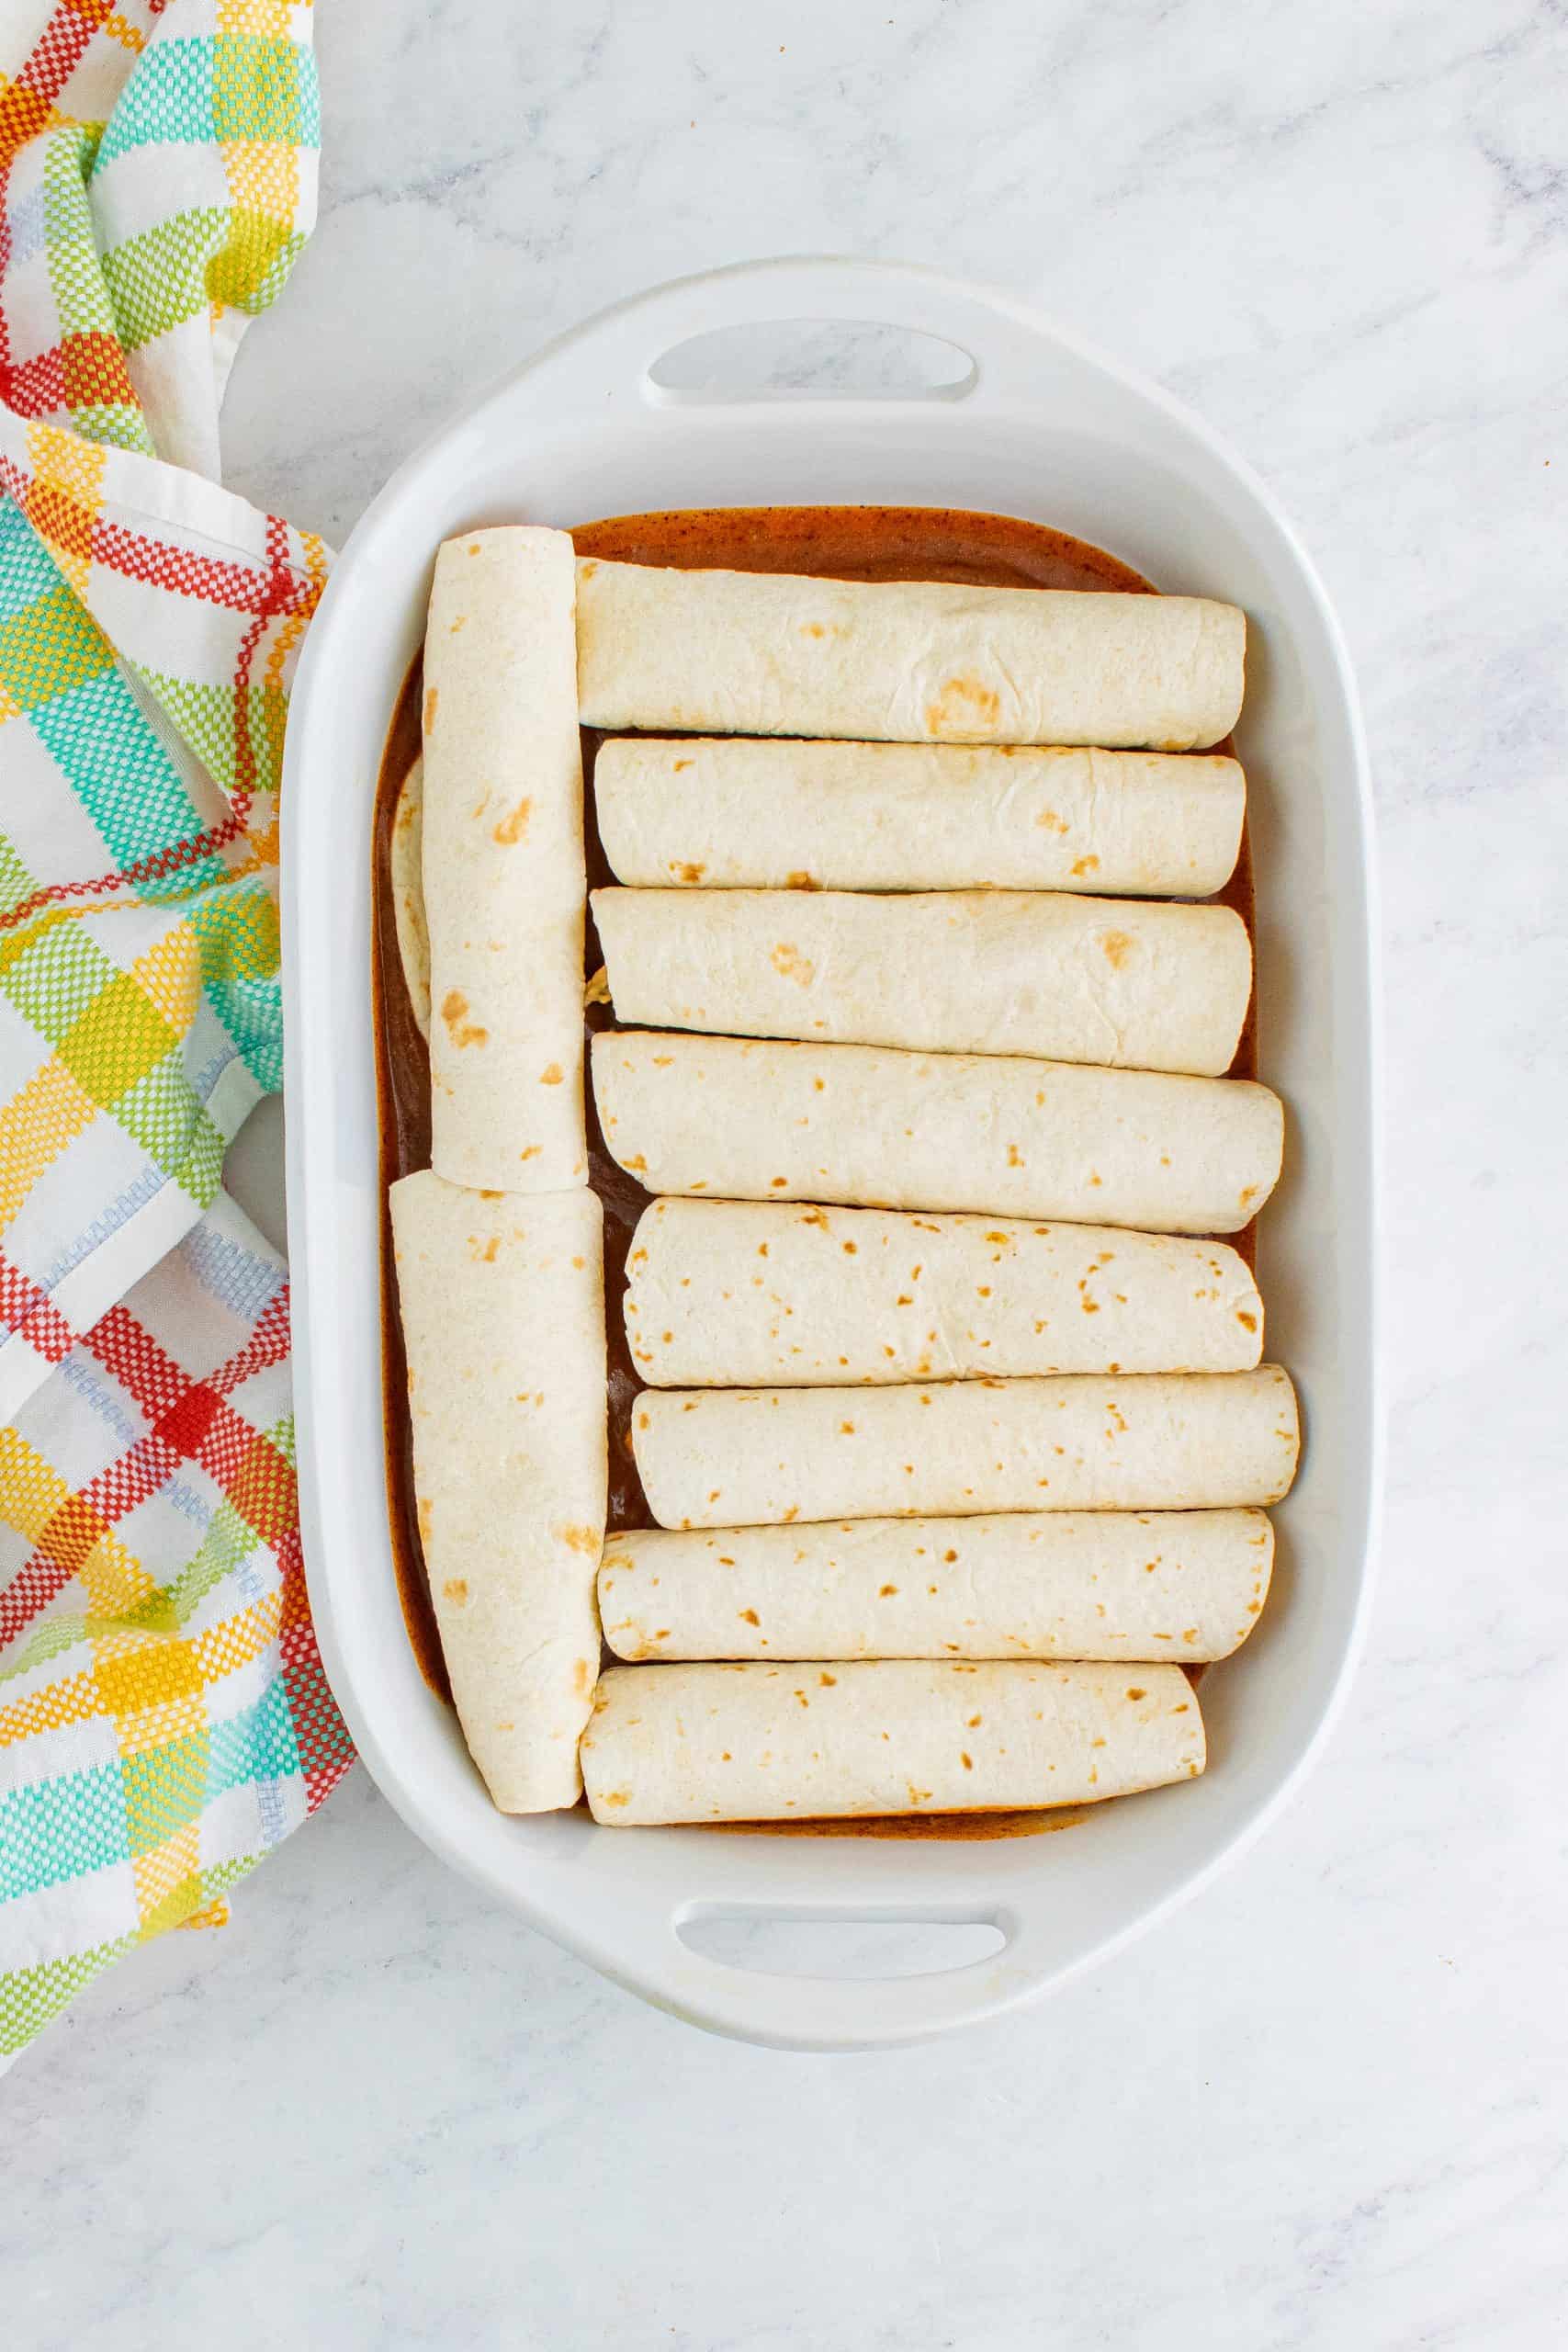 10 rolled tortillas placed in a single layer in a white baking dish.